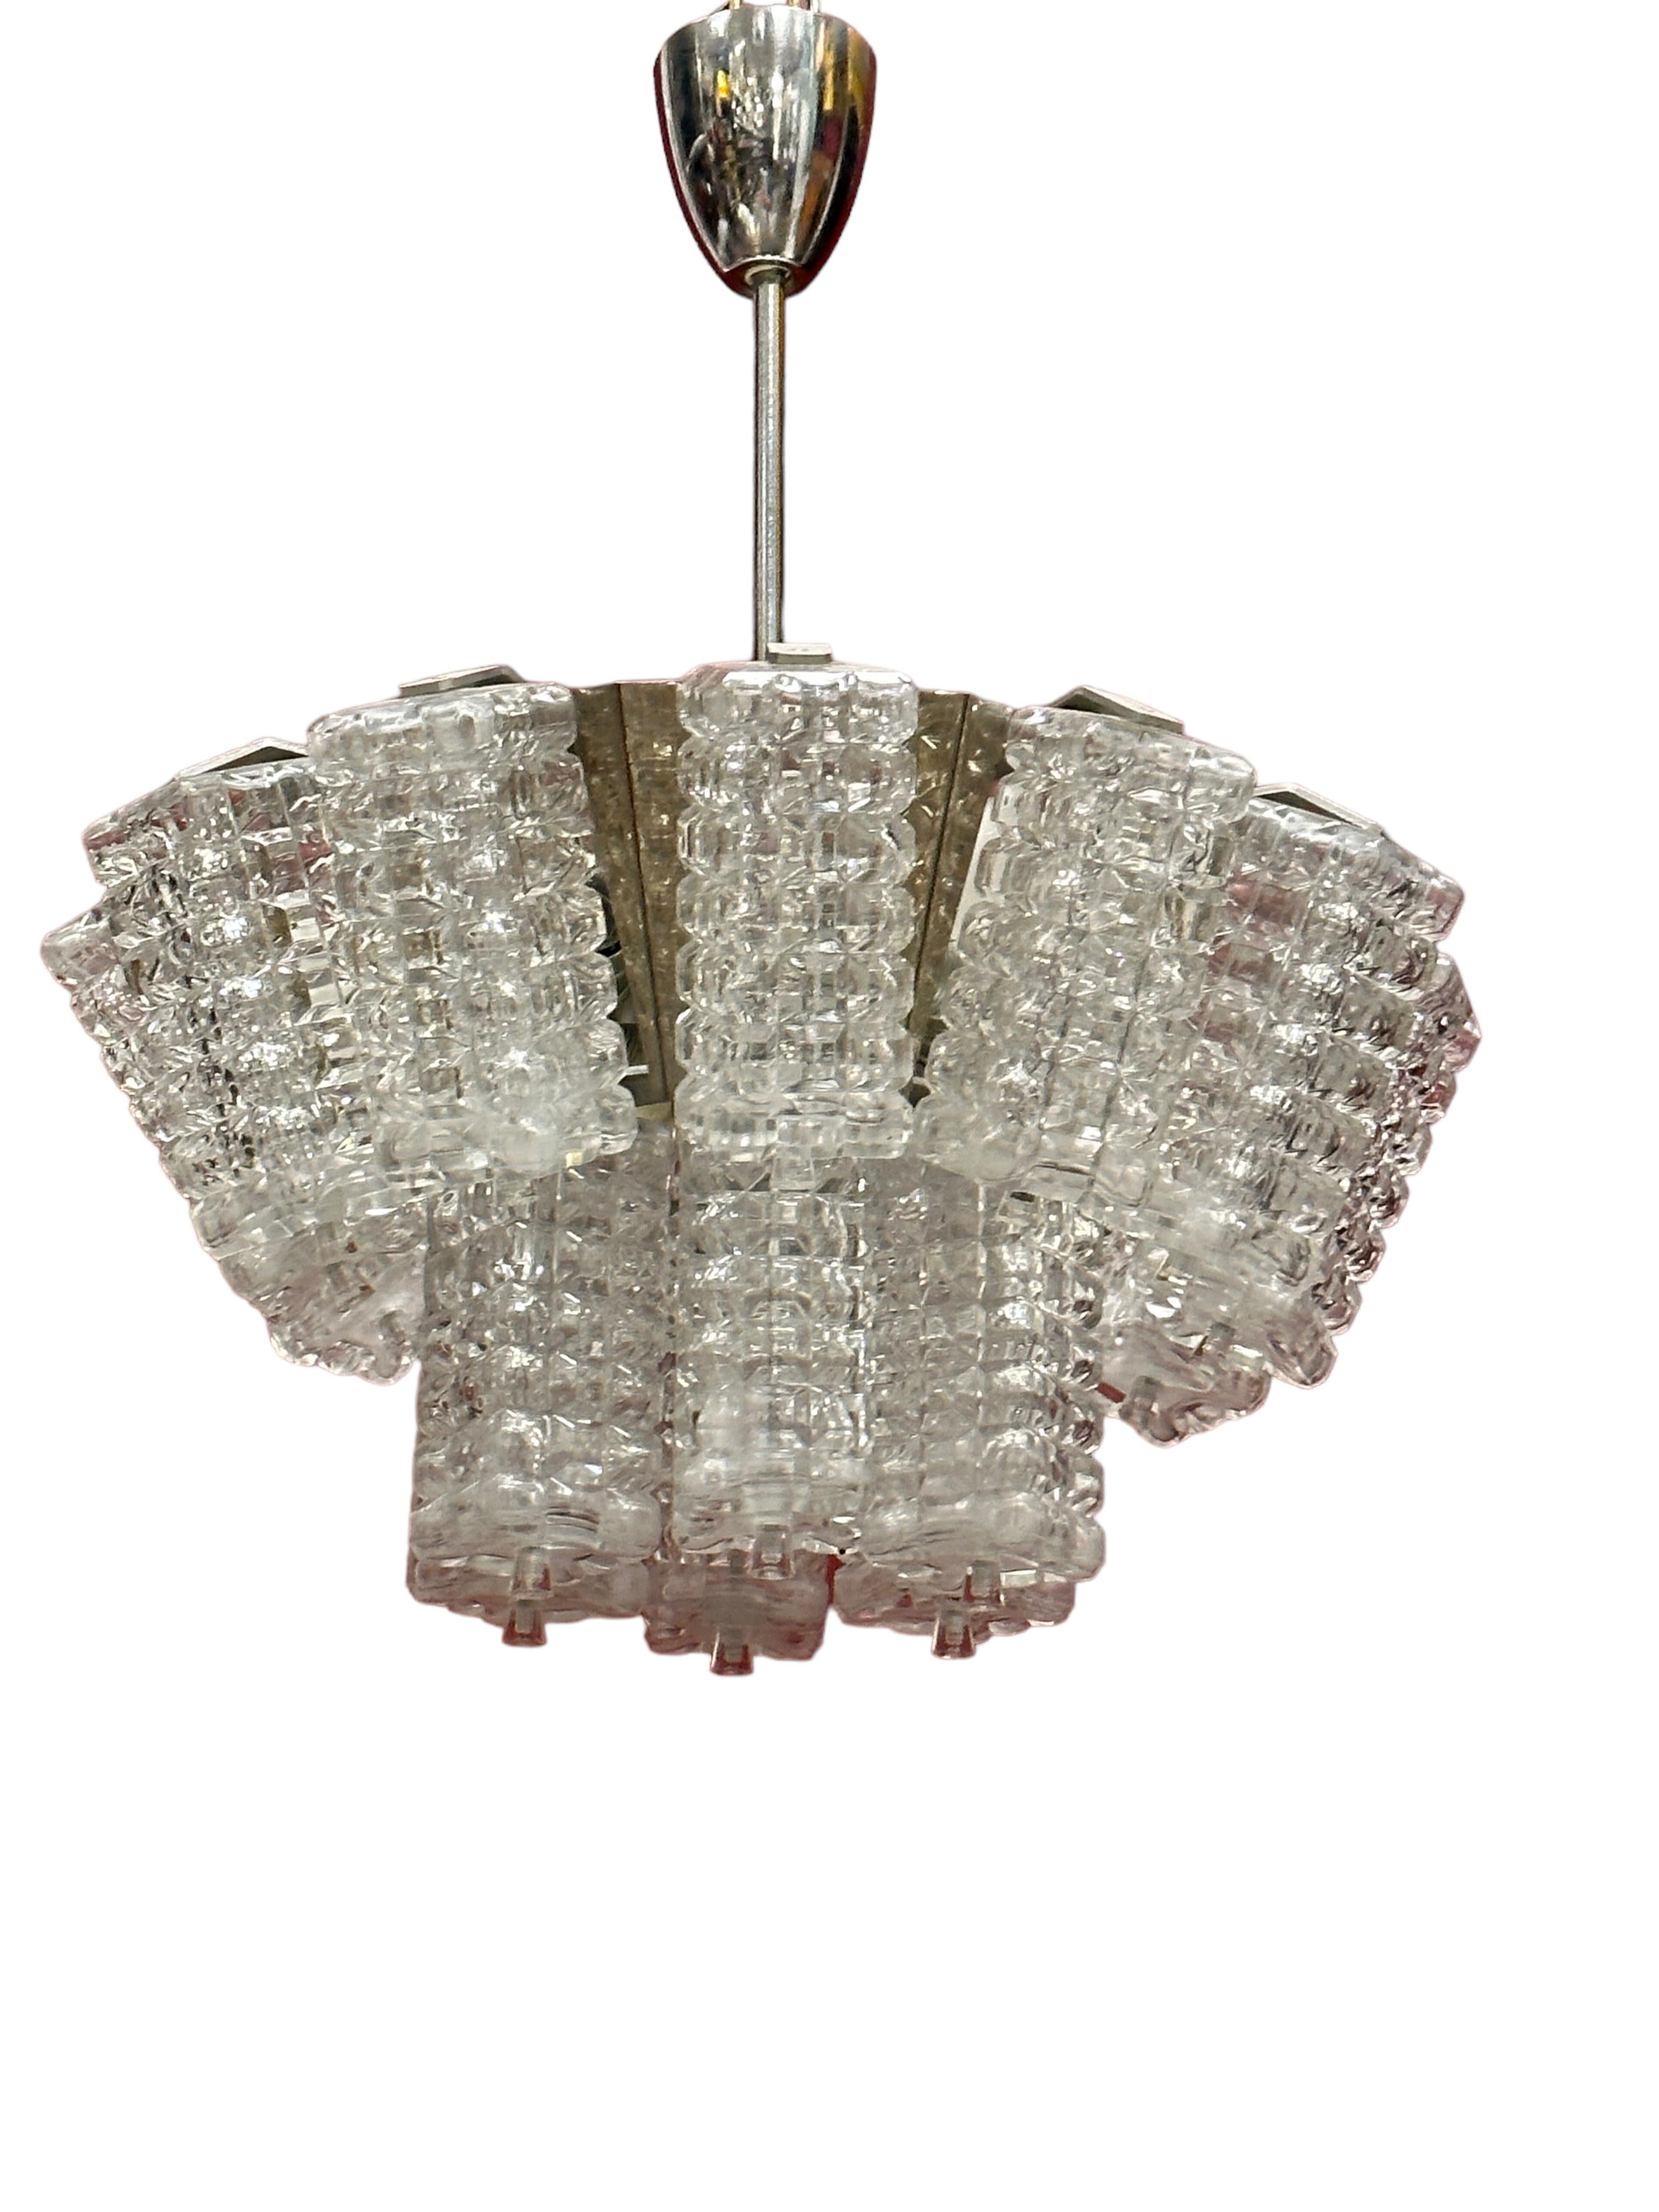 Pair of Two Tiered Glass Cube Chandelier by Austrolux, Austria, 1960s For Sale 5